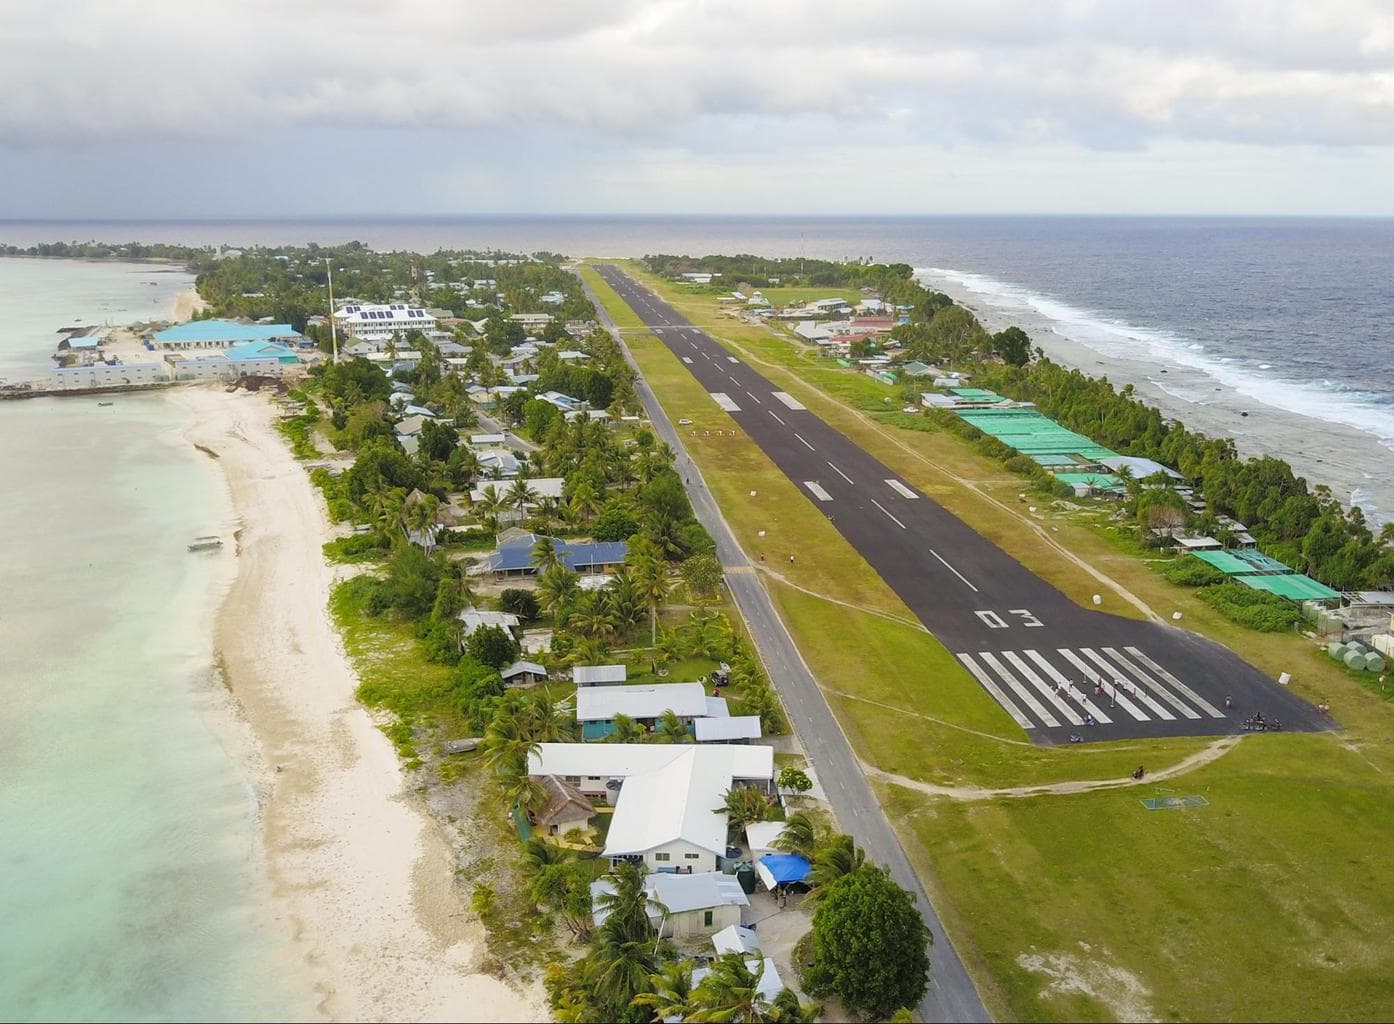 Tuvalu’s runway from my drone